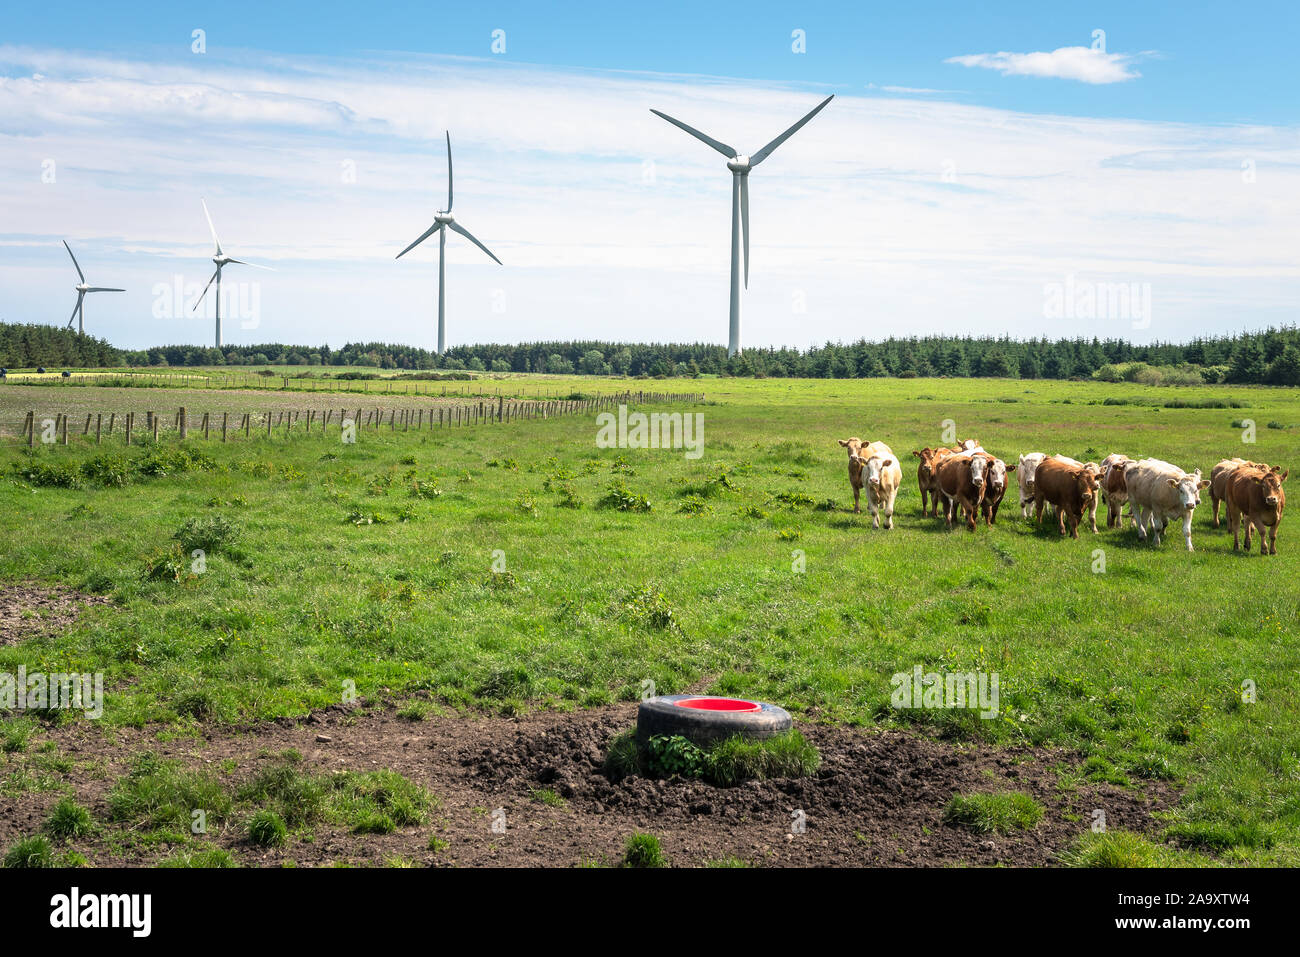 Wind turbines with cows in a grassy field in foreground on a sunny spring day Stock Photo